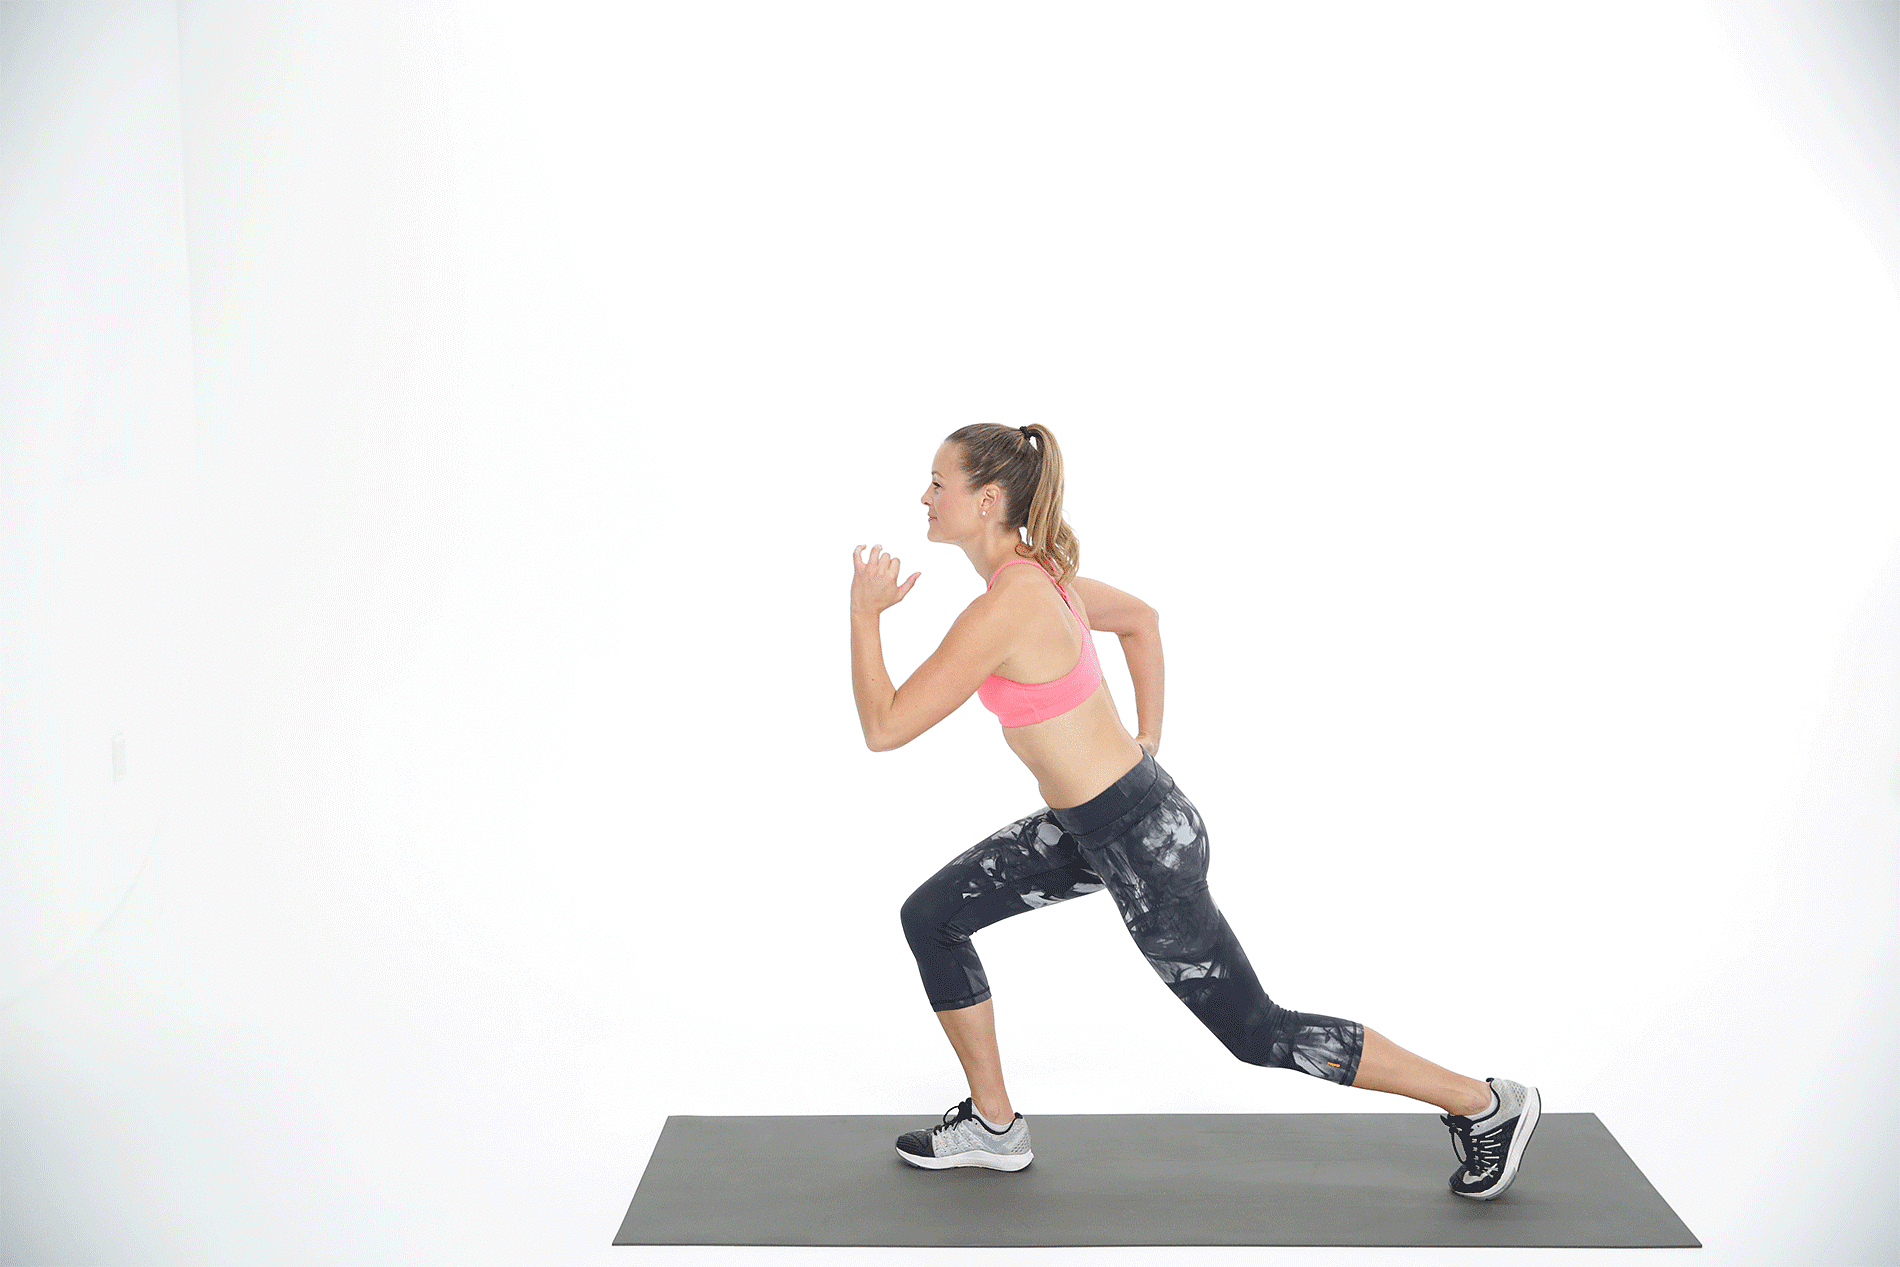 This Simple Cardio Move Is Going to Reinvent Your Butt